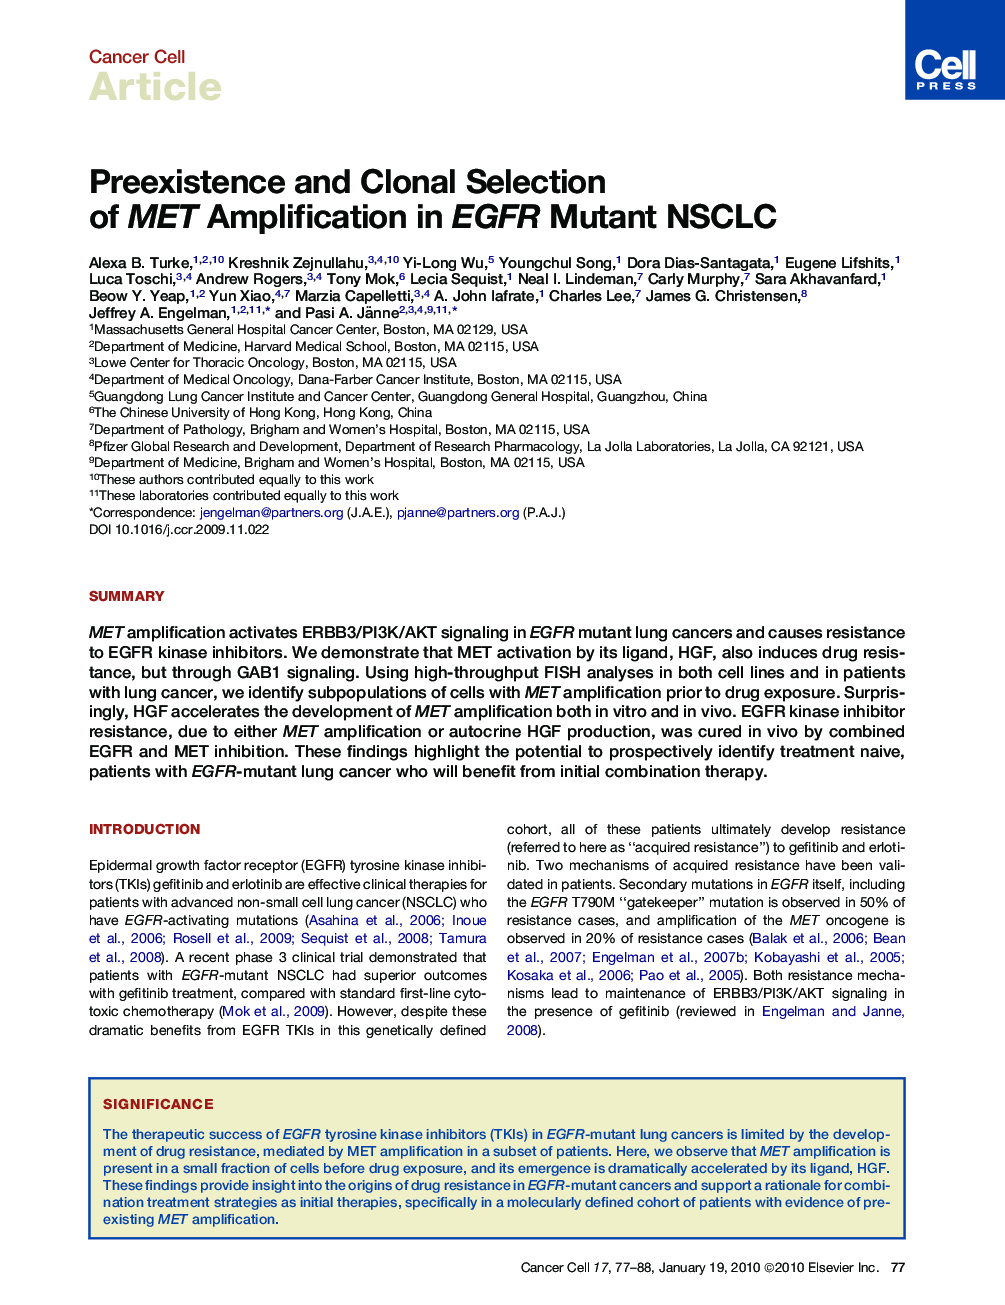 Preexistence and Clonal Selection of MET Amplification in EGFR Mutant NSCLC